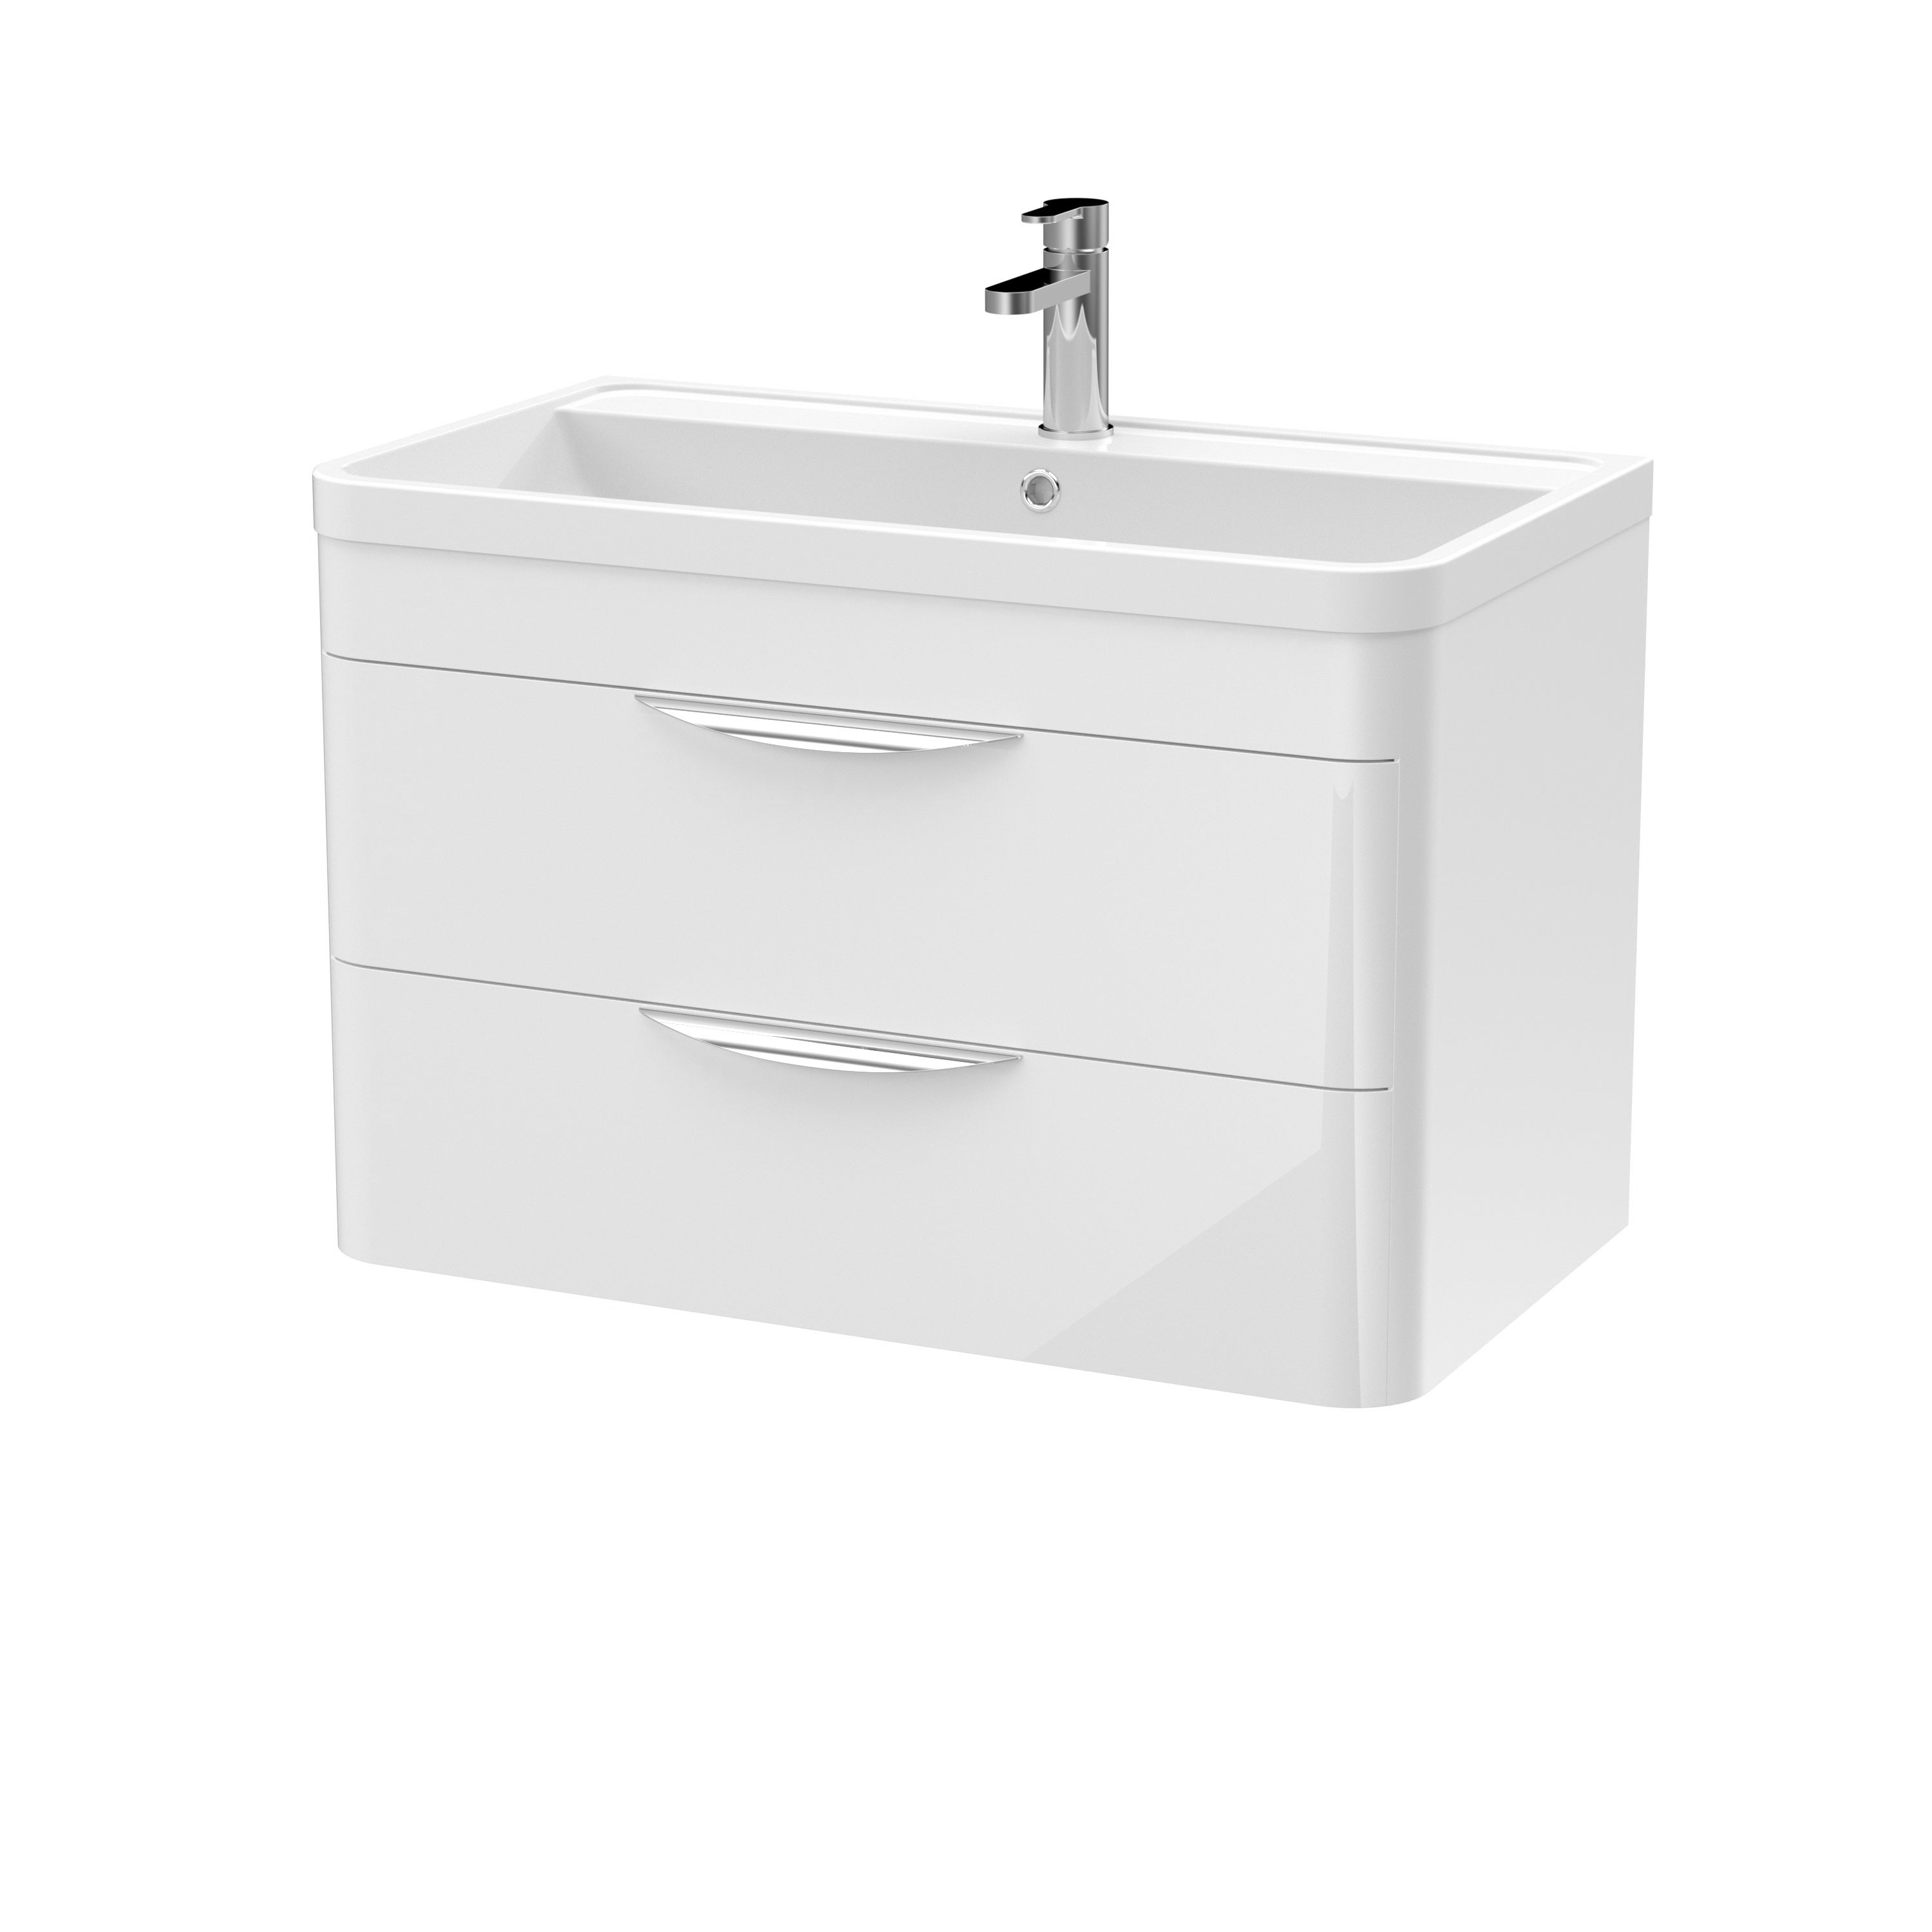 Parade Wall Mounted Vanity Unit with Polymarble Basin Gloss White